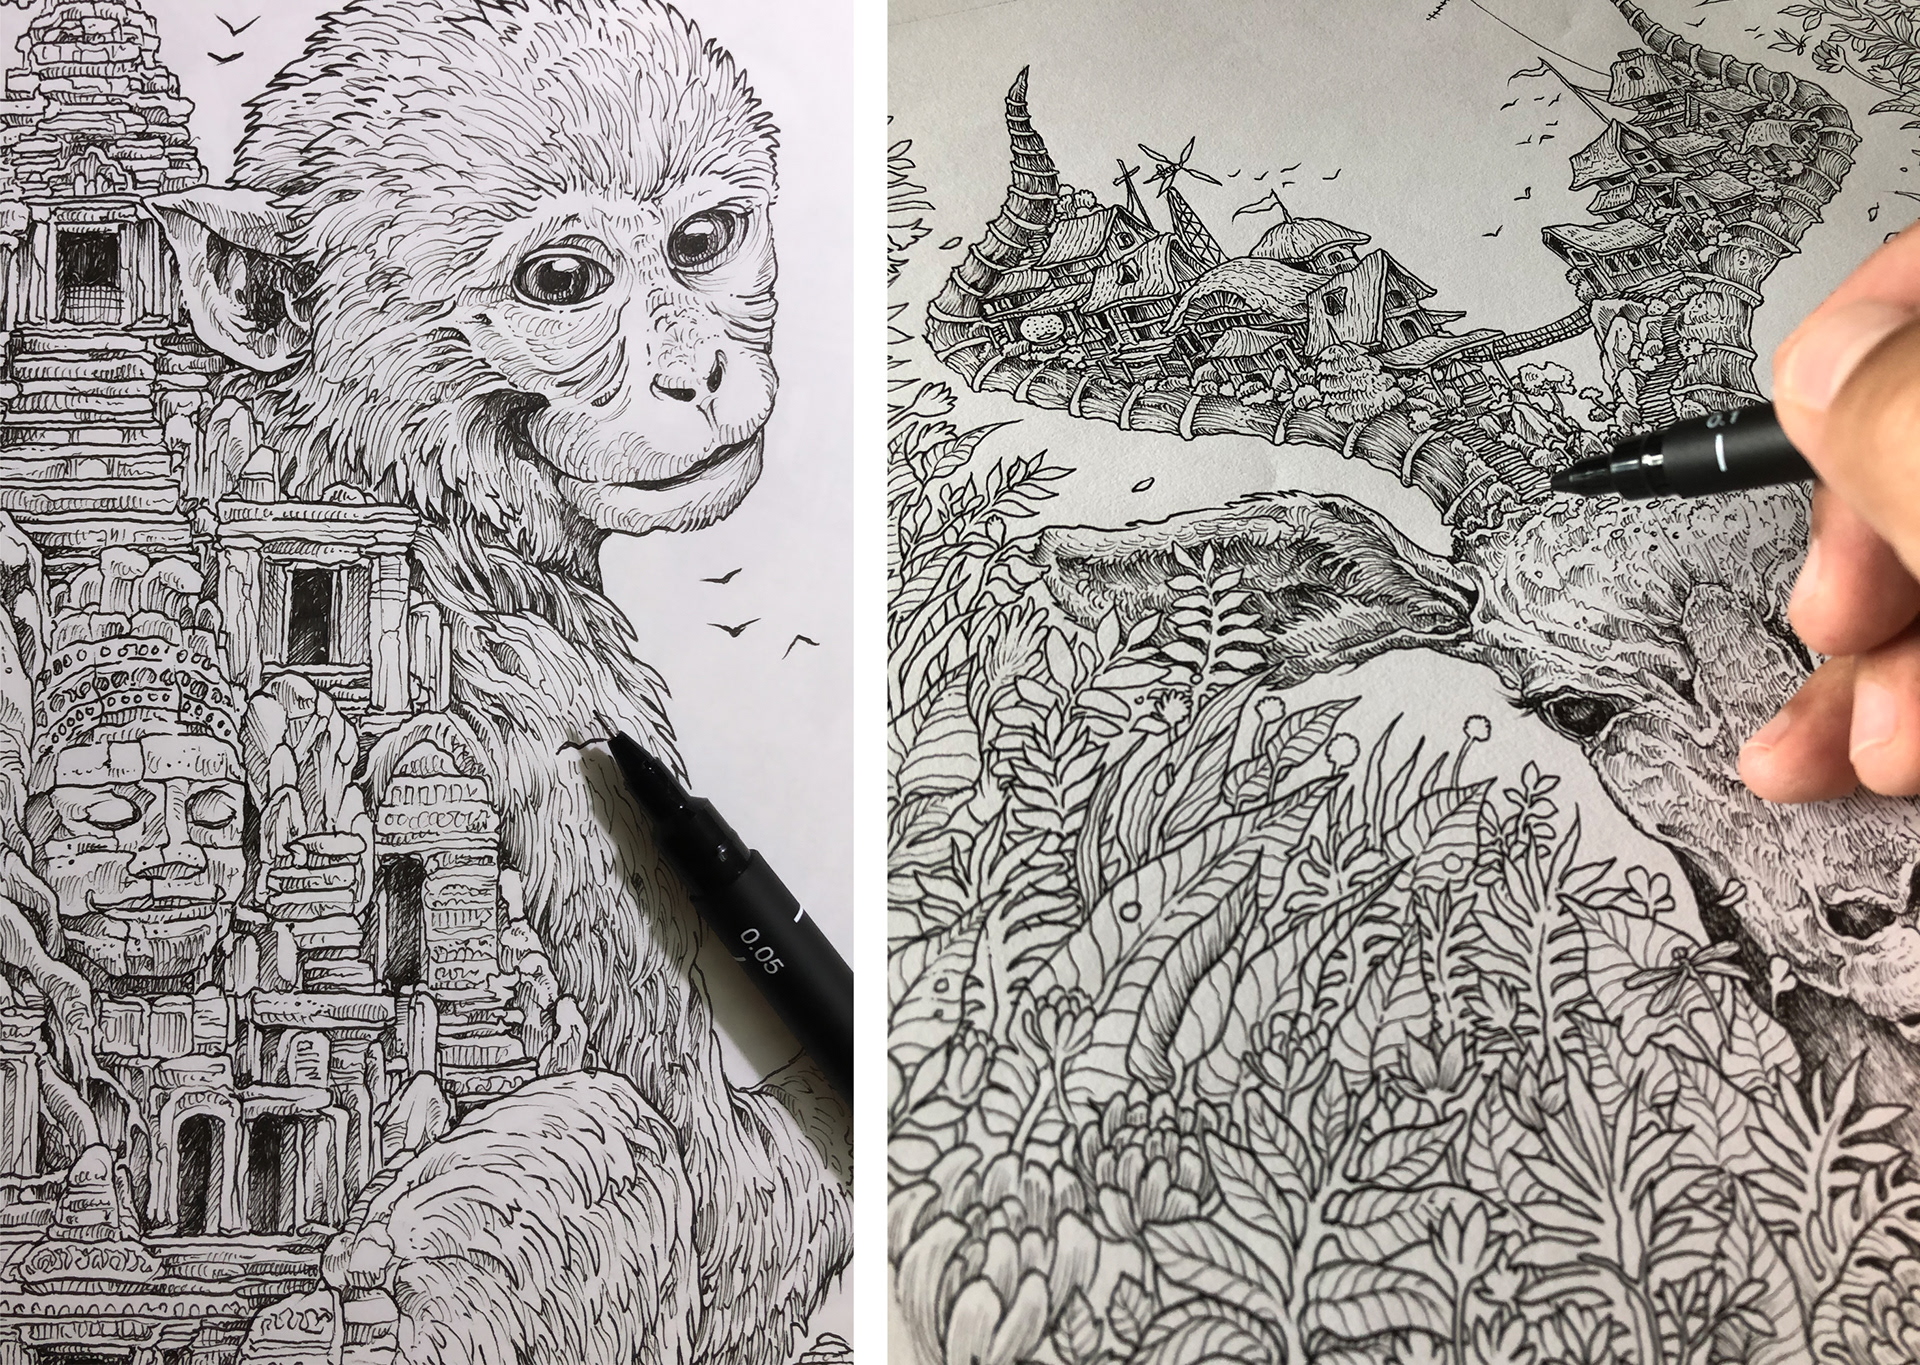 Worlds within worlds by Kerby Rosanes